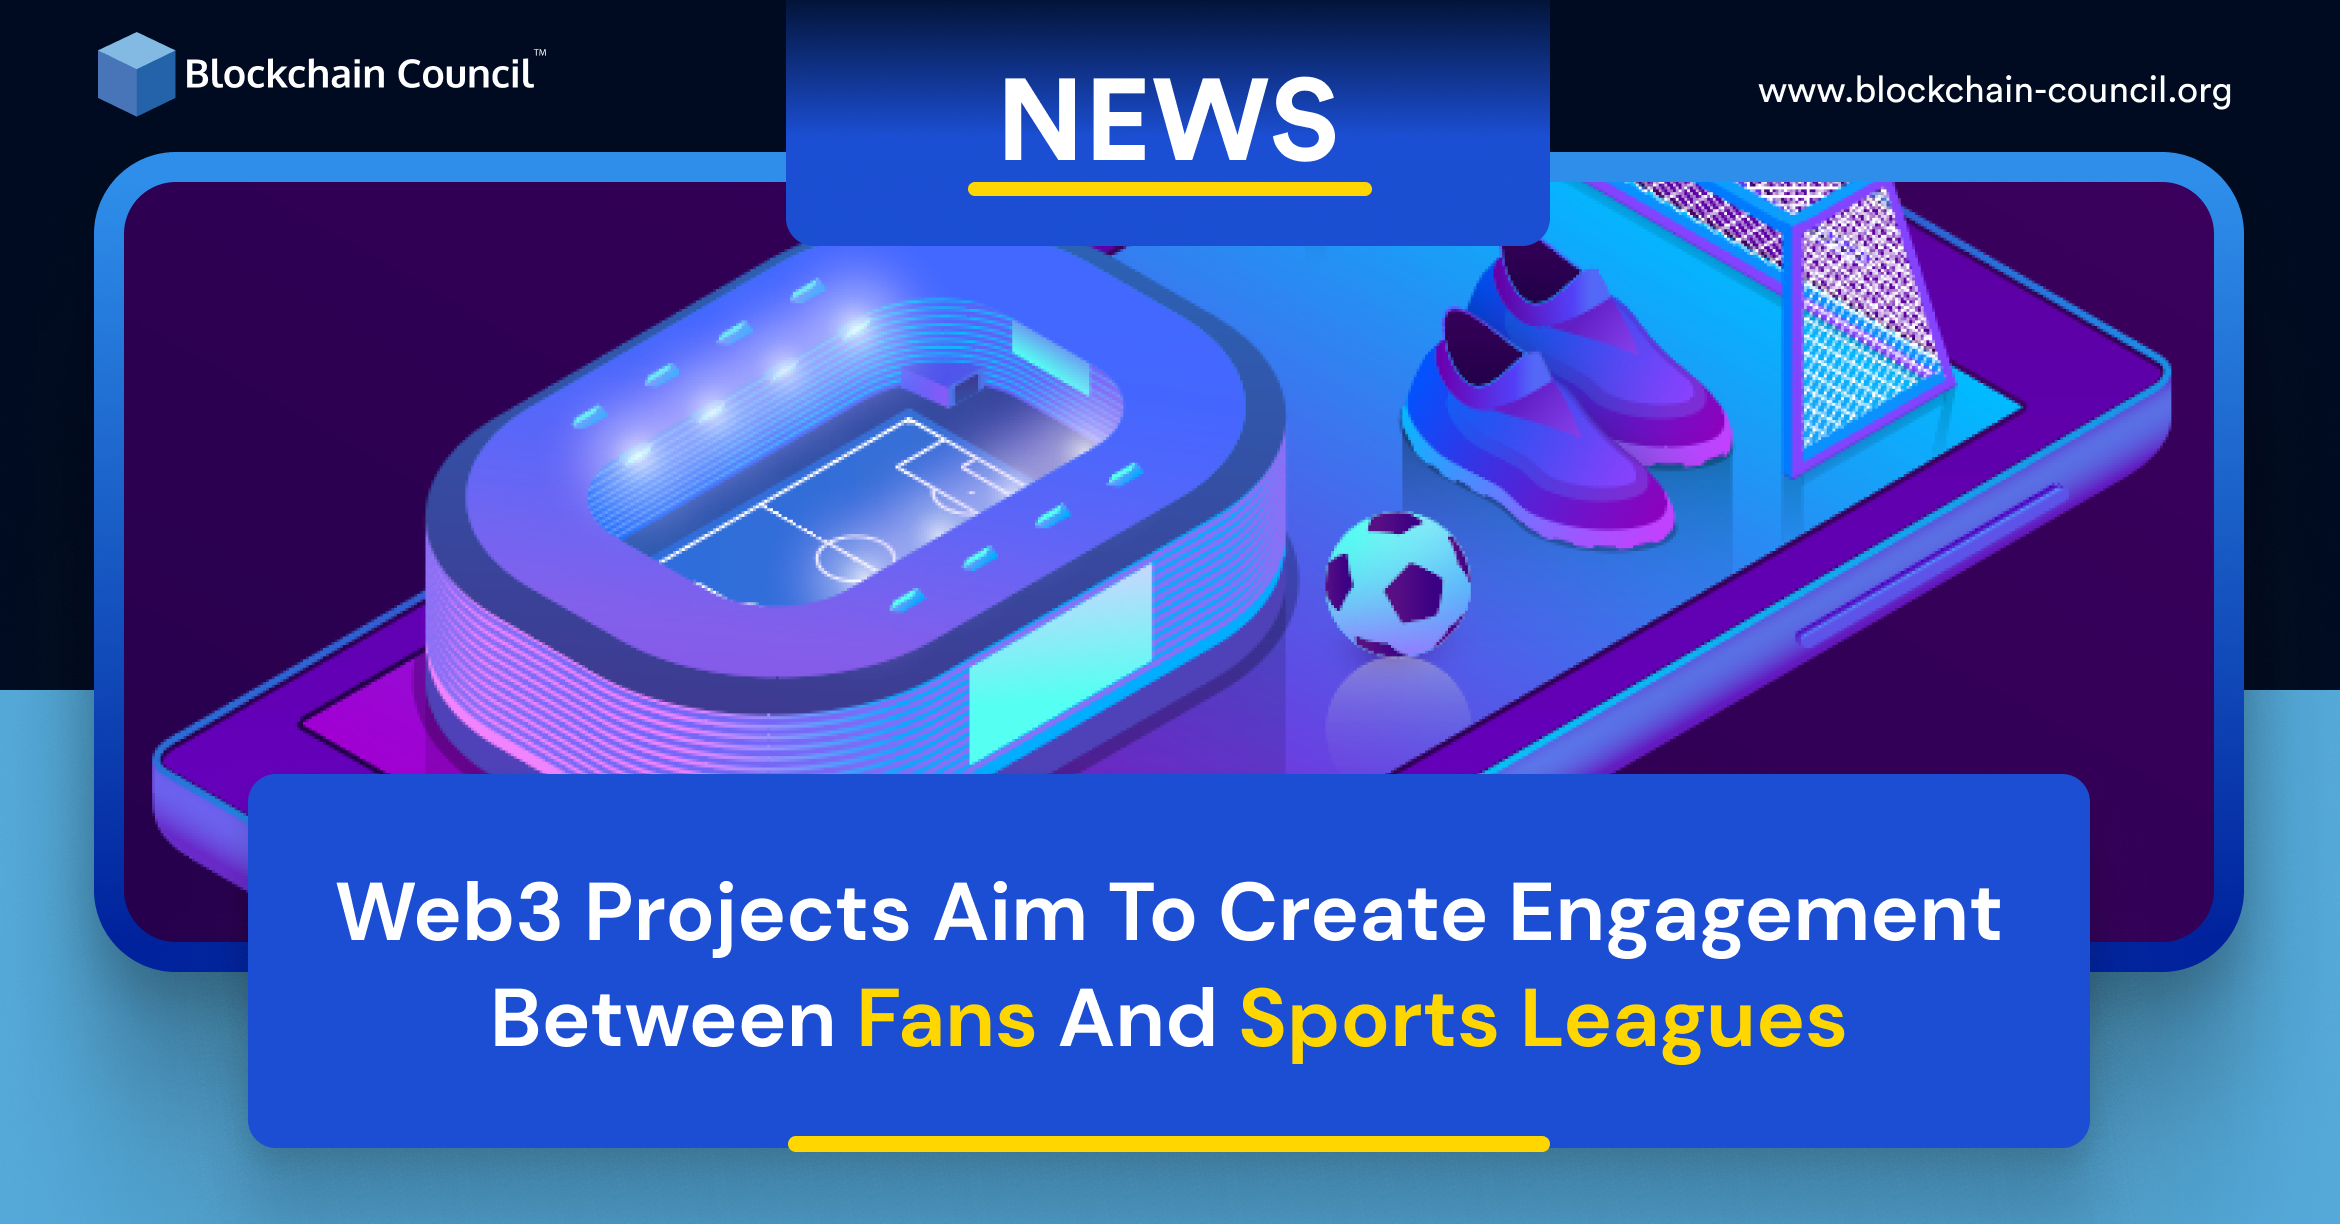 Web3 Projects Aim to Create Engagement Between Fans and Sports Leagues